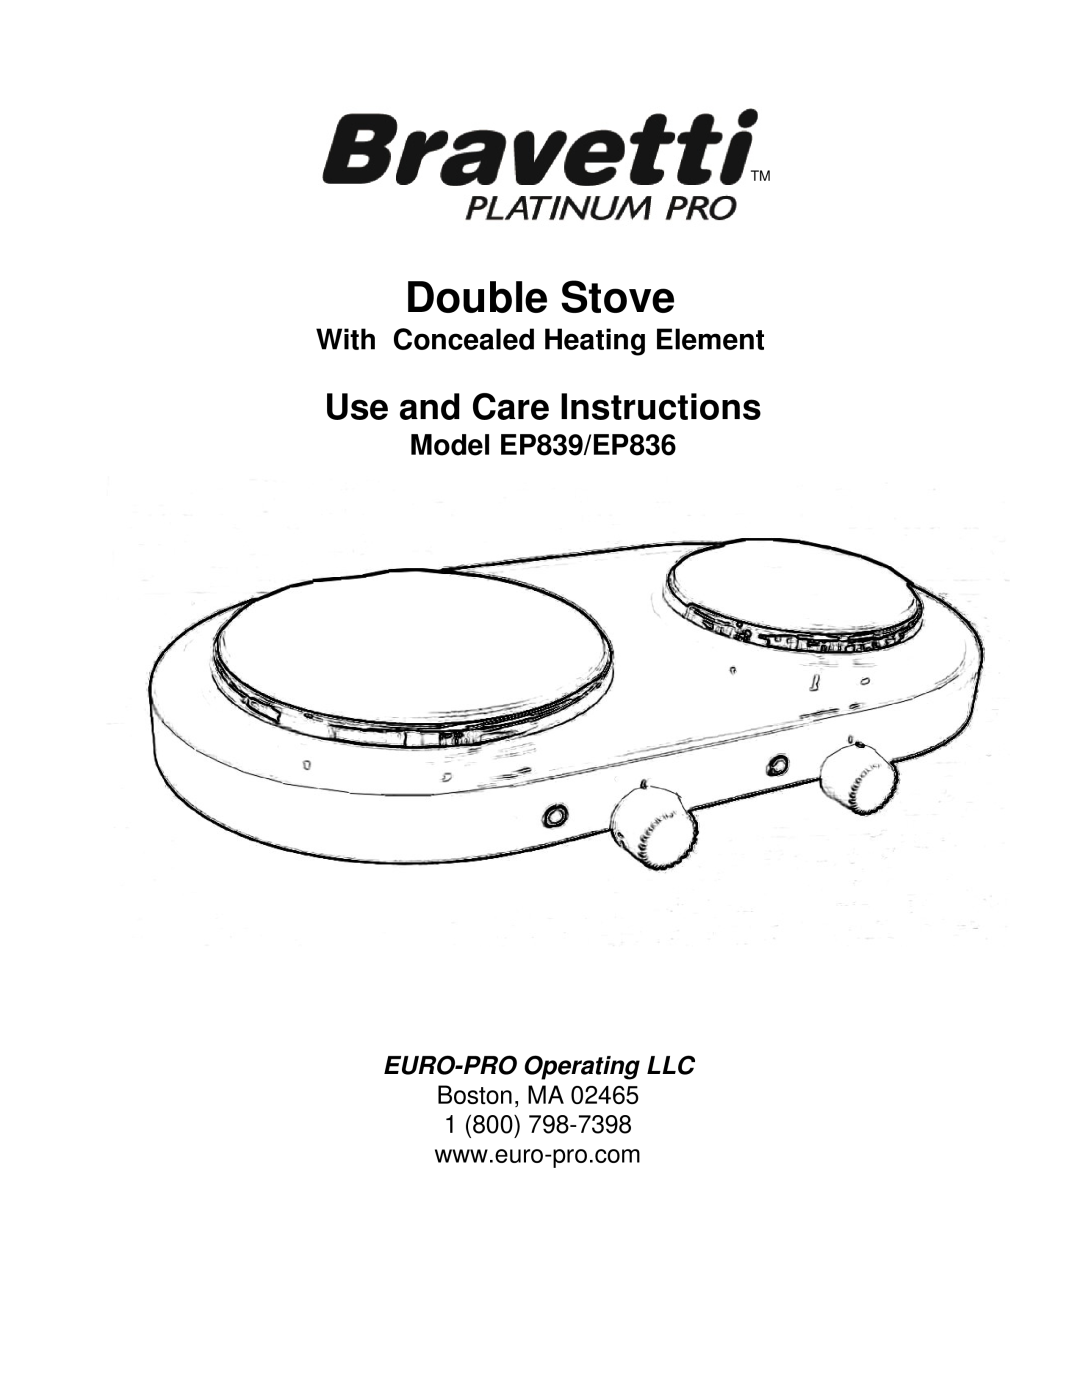 Bravetti manual Double Stove, Use and Care Instructions, With Concealed Heating Element, Model EP839/EP836 